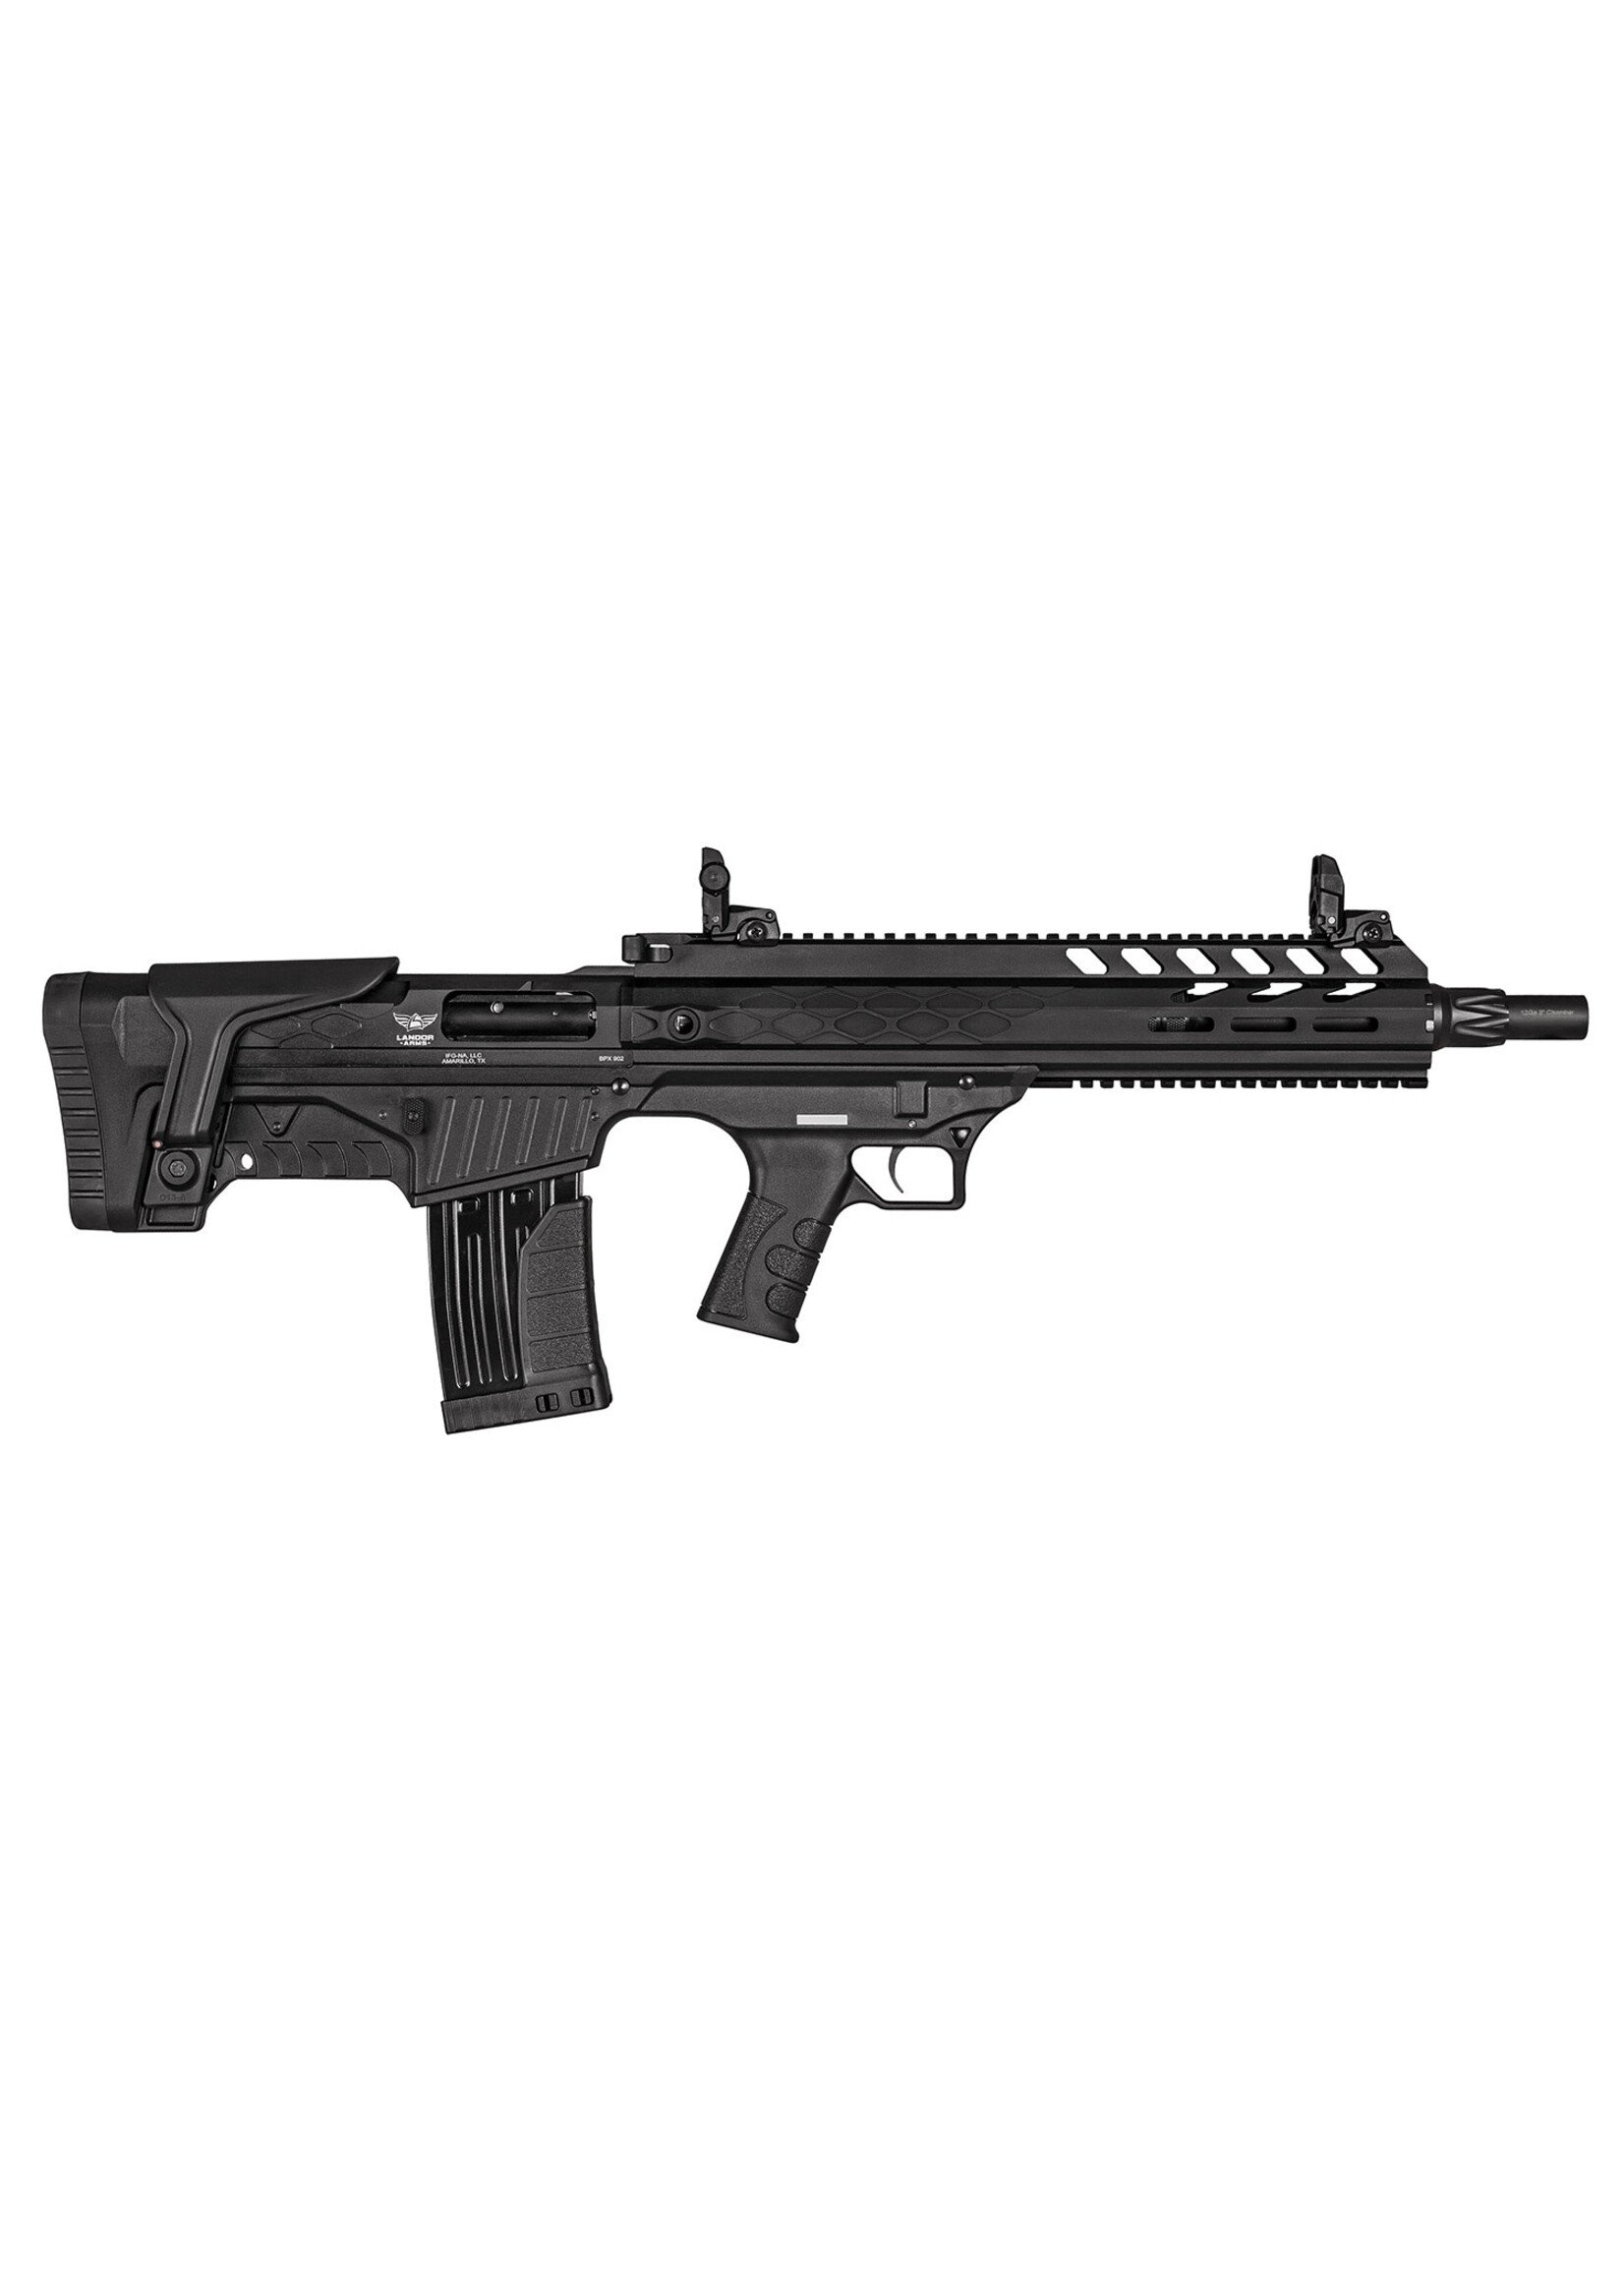 Landor Arms Landor Arms LDBPX9021218 BPX 902 12 Gauge 5+1/2+1 18.50" Barrel, Steel Receiver w/Black Finish, Flip Up Front & Rear Sights, Fixed Bullpup Stock, Includes Two 5rd Magazines & One 2rd Magazine Optics Ready